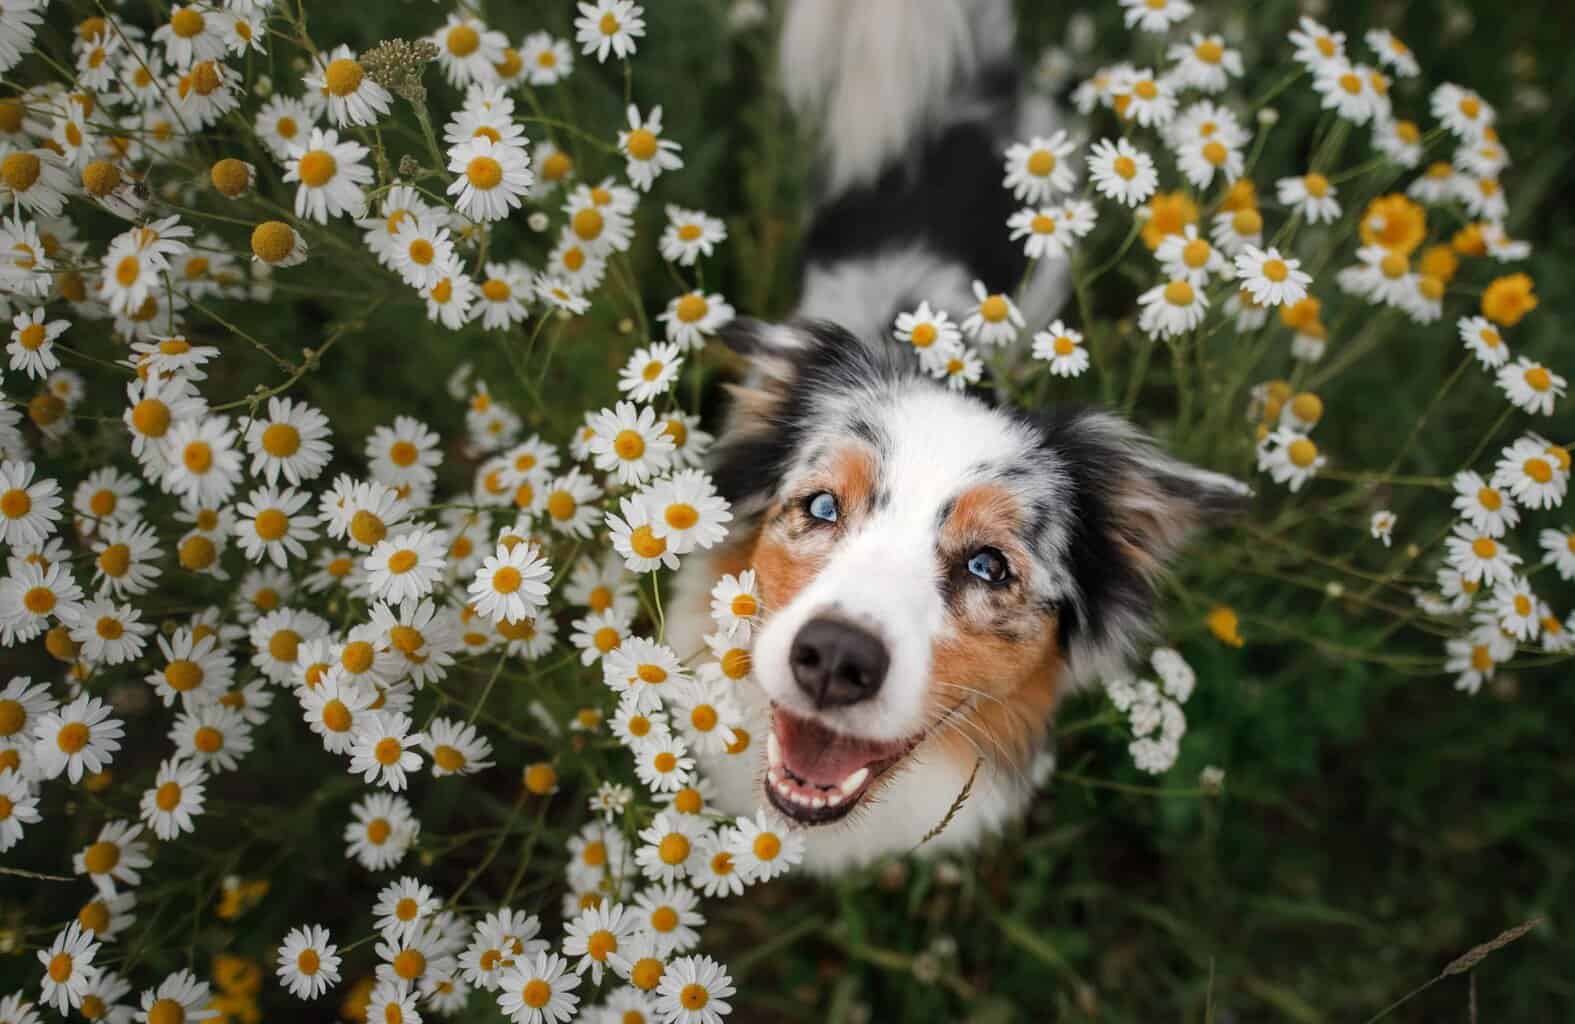 Happy Australian shepherd surrounded by daisies and grass. Combining pesticides and dogs can be dangerous. Some factors that increase the risk of health issues are the type, amount, and frequency of pesticides used.